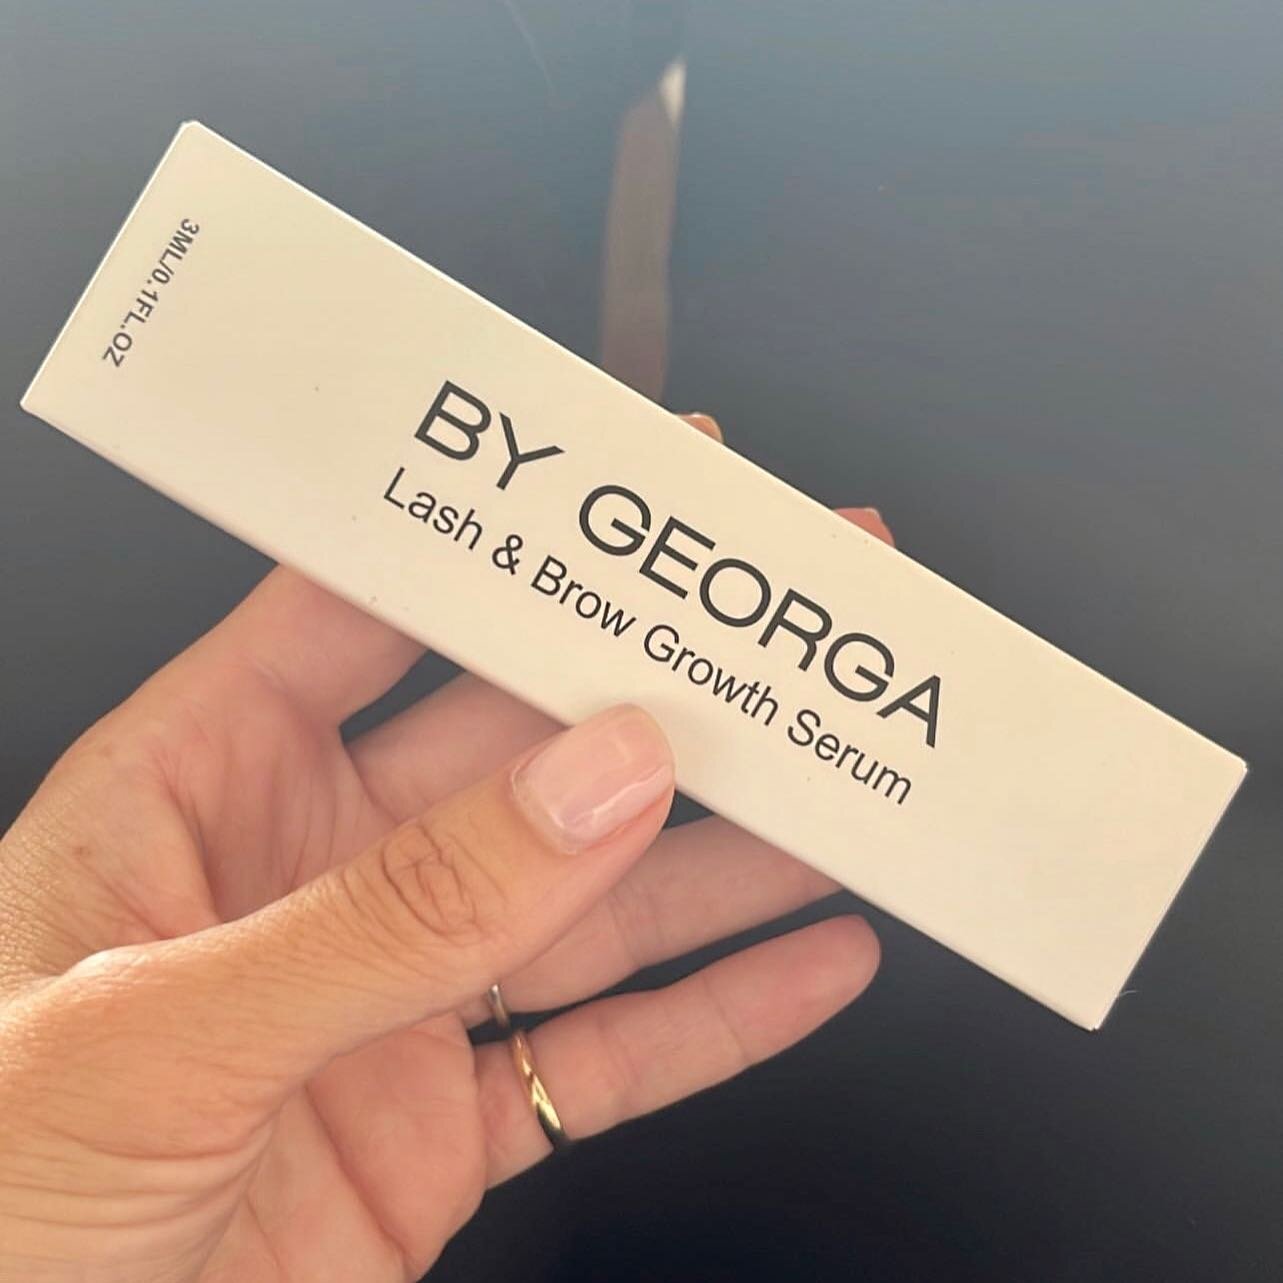 BY GEORGA Lash &amp; Brow Growth Serum now available to purchase online!